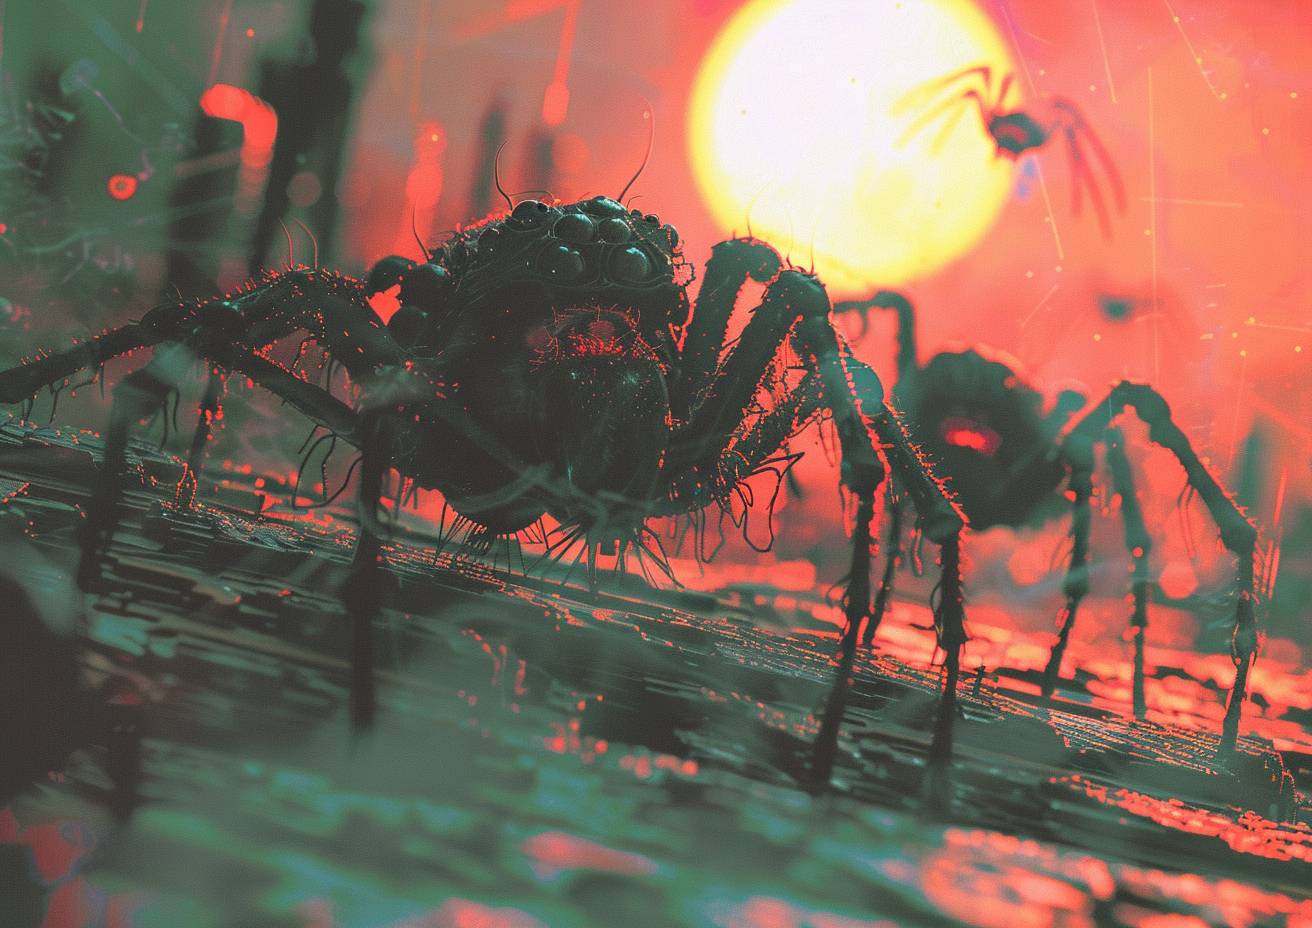 nightmarish black spiders swarm on Mars, in the style of ghastly glitchpunk, uranium glass, Incan city, strong visual flow